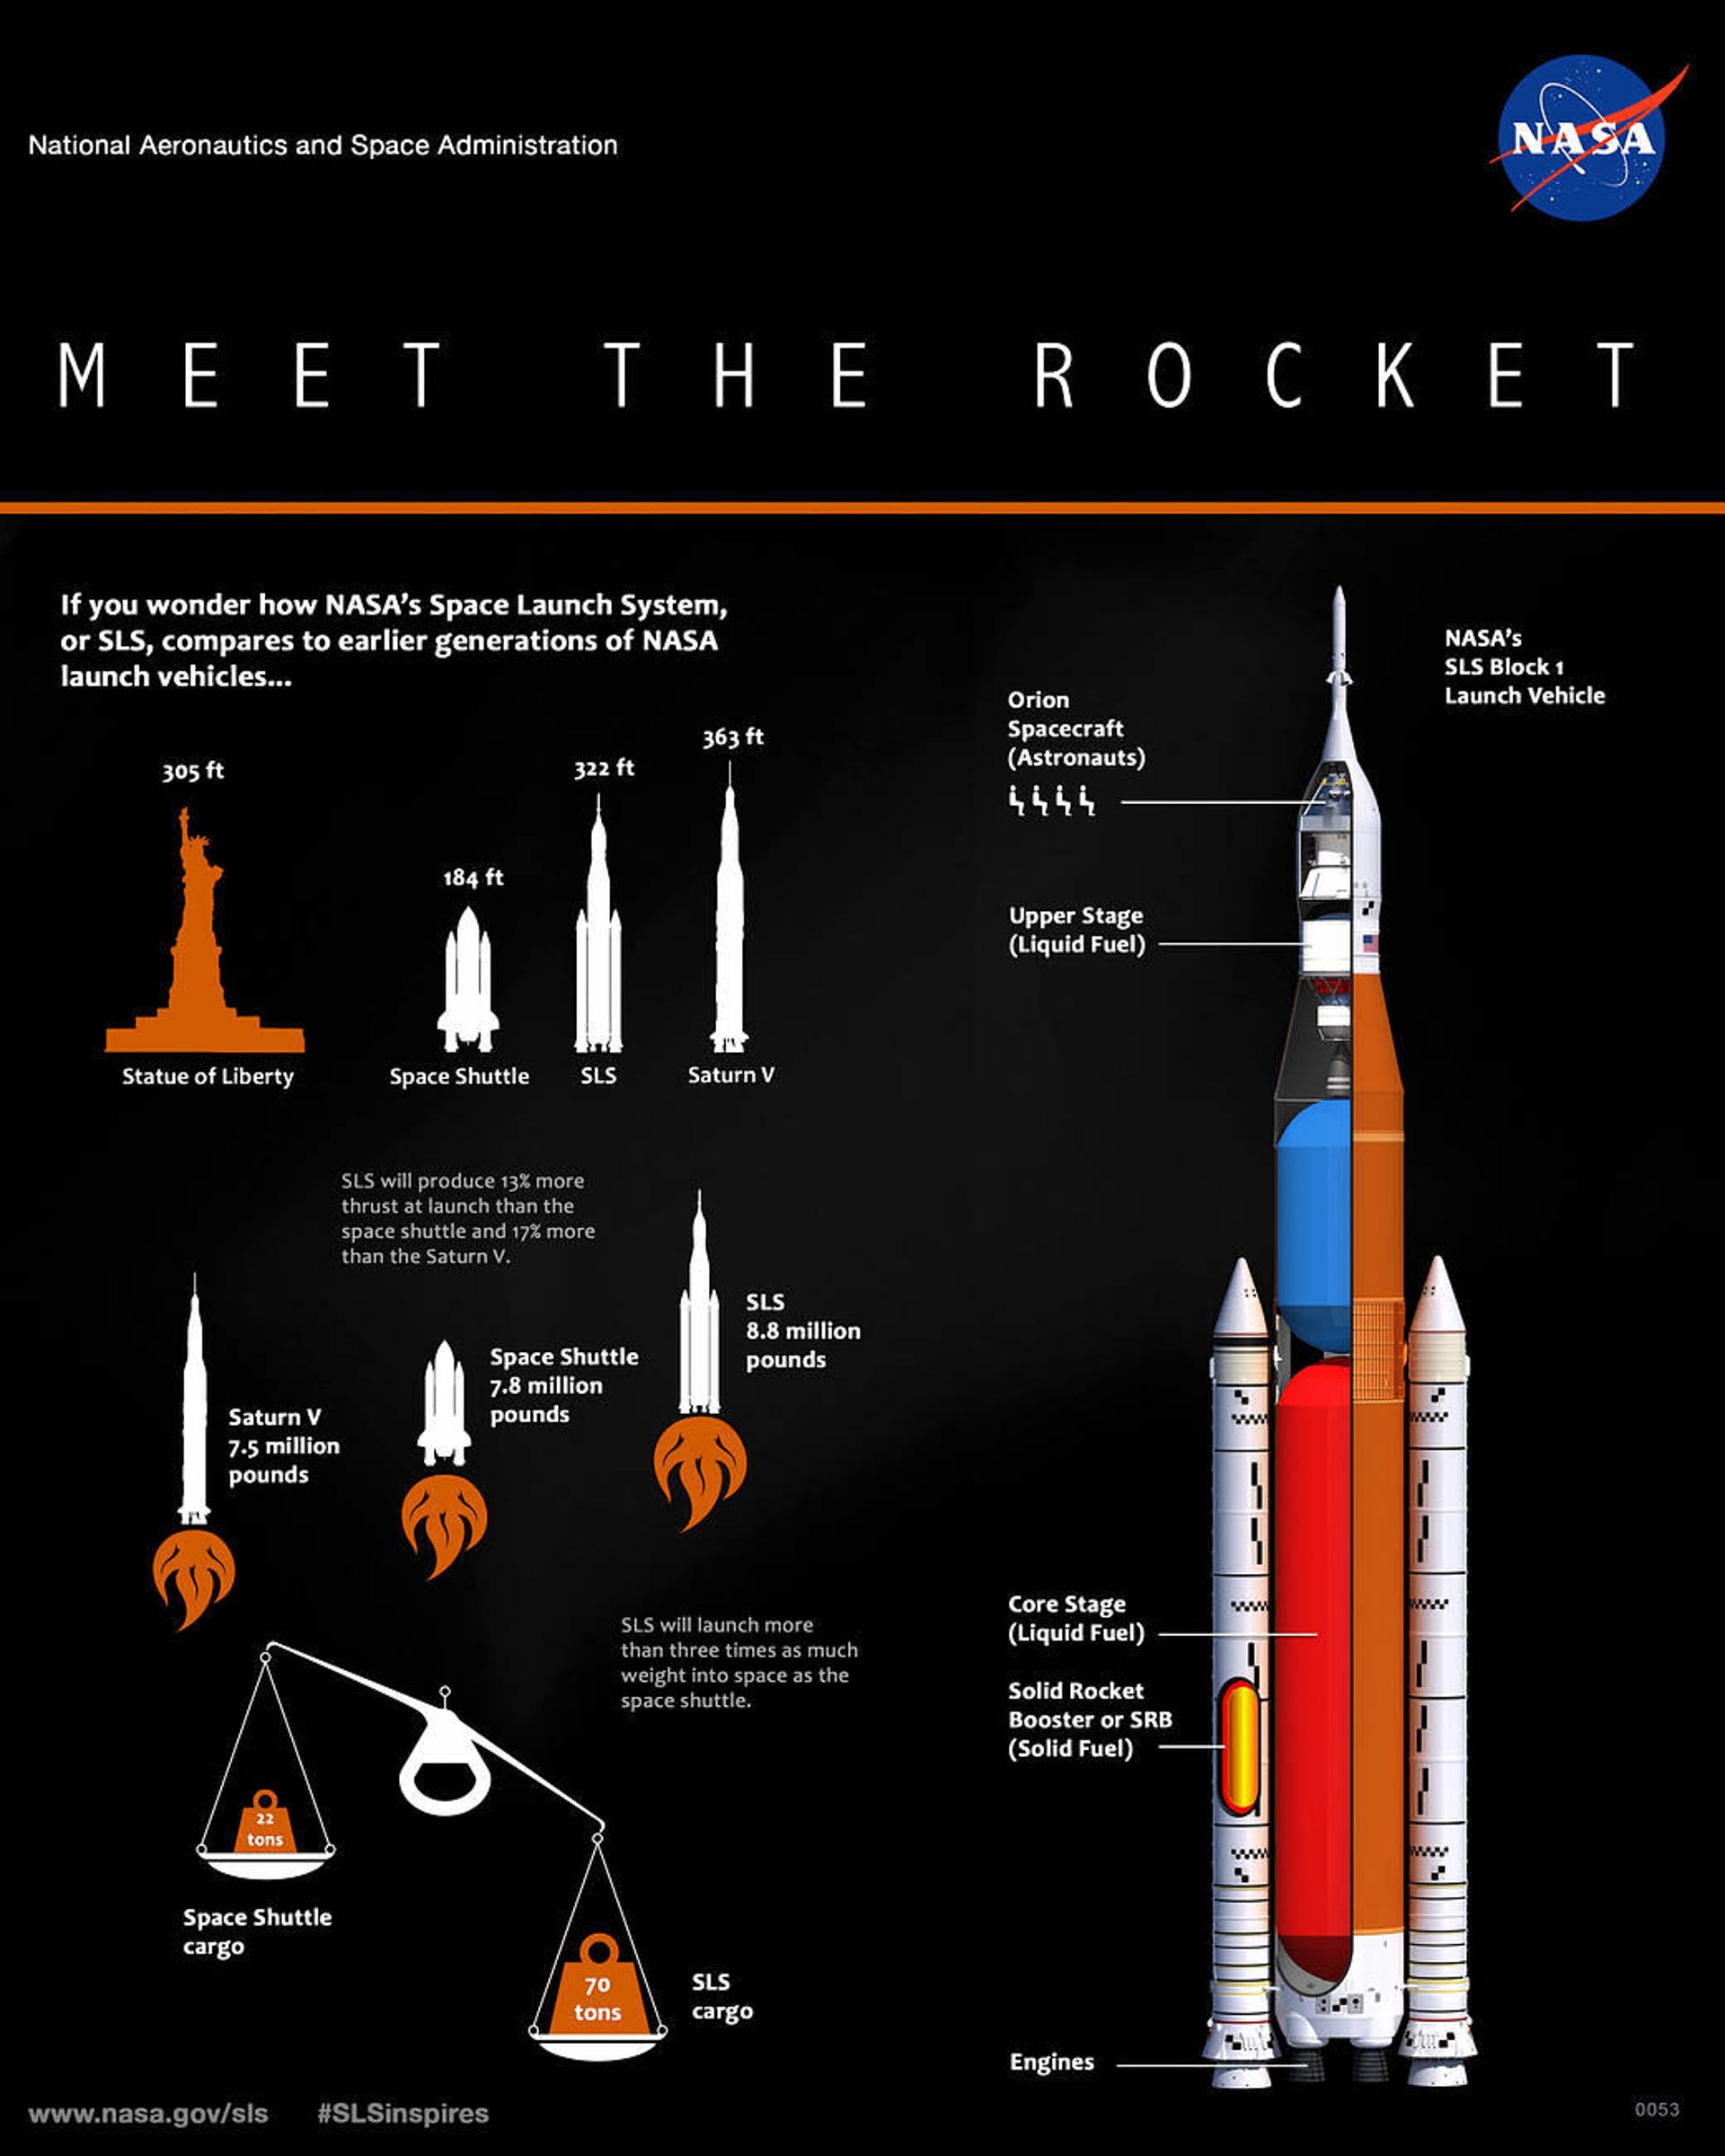 Infographic describing NASA's next big rocket, the Space Launch System.